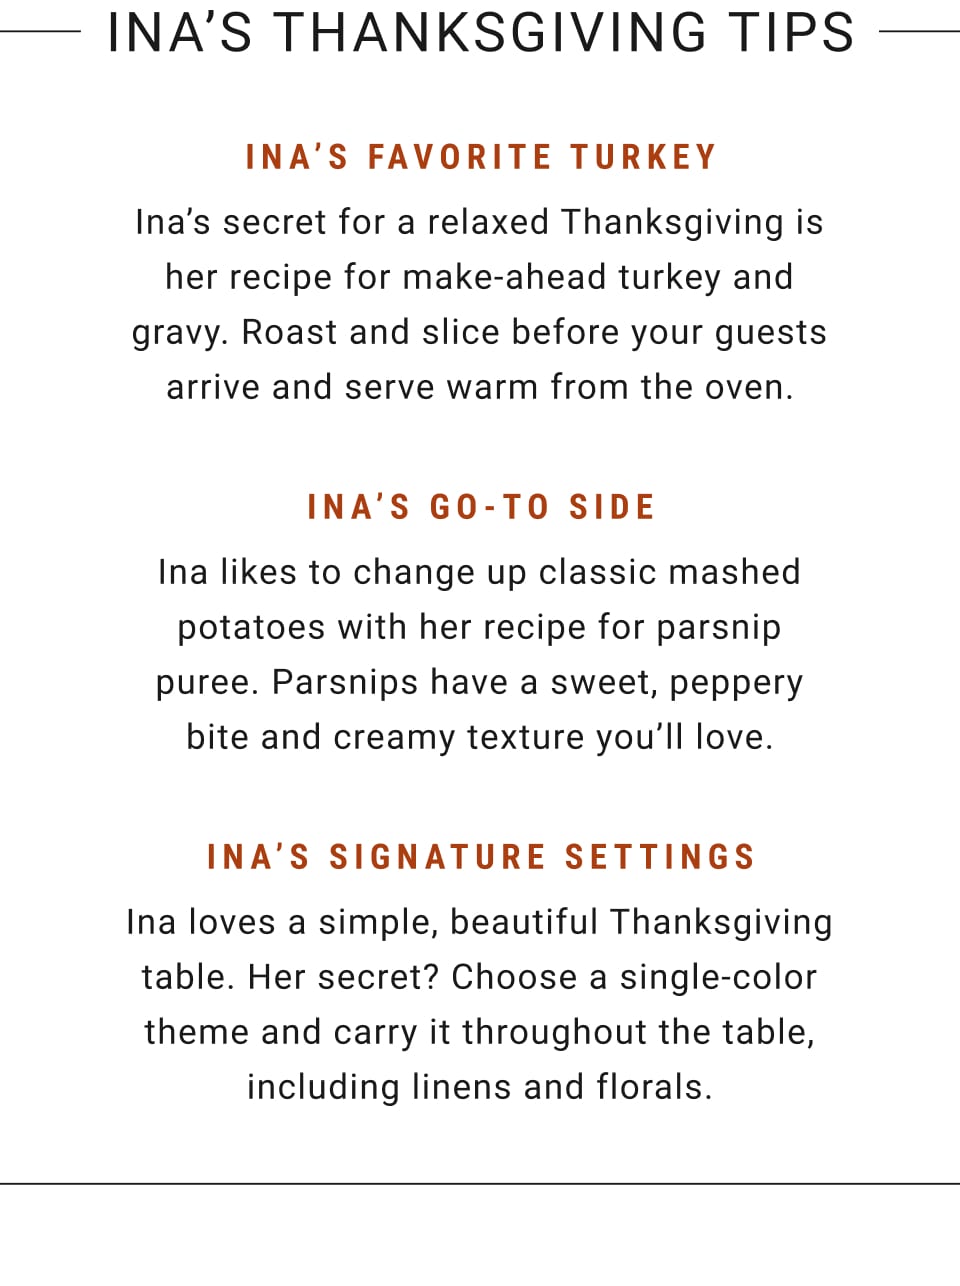 Ina's Thanksgiving Tips